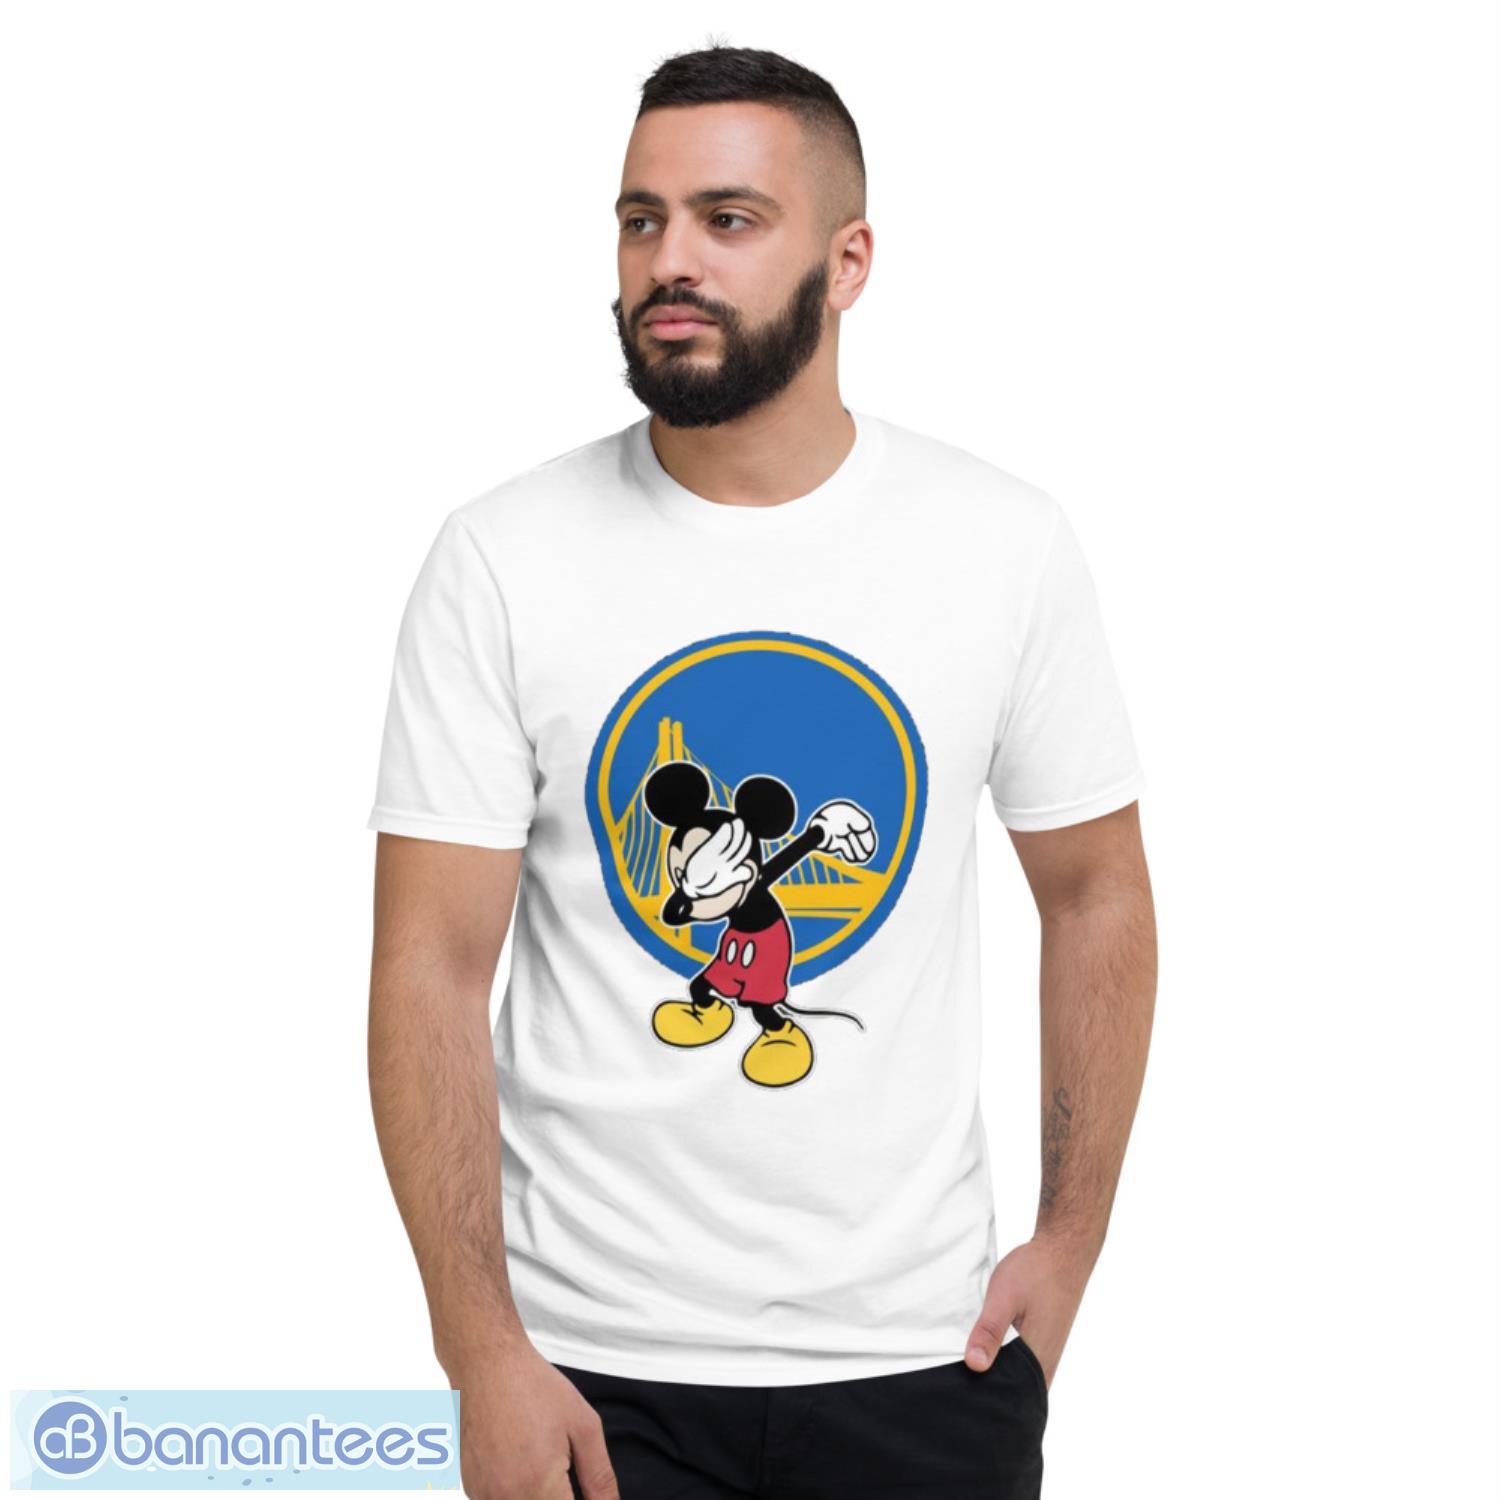 mickey mouse golden state warriors